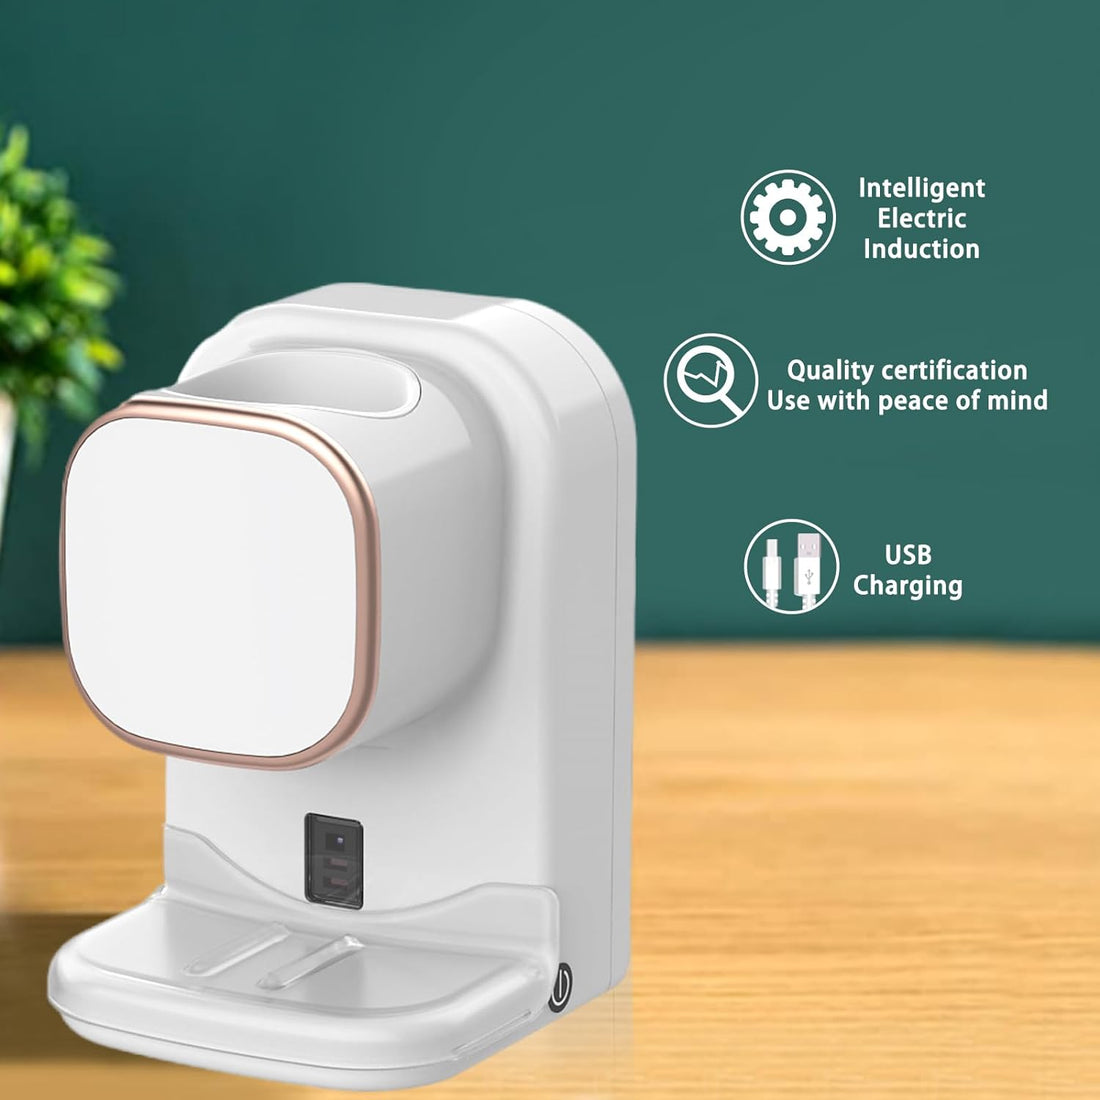 KIKOUVIEV Automatic Toothpaste Dispenser Bathroom Automatic Toothpaste Squeezer Wall Mounted with Sensor for Kids and Adult(White)